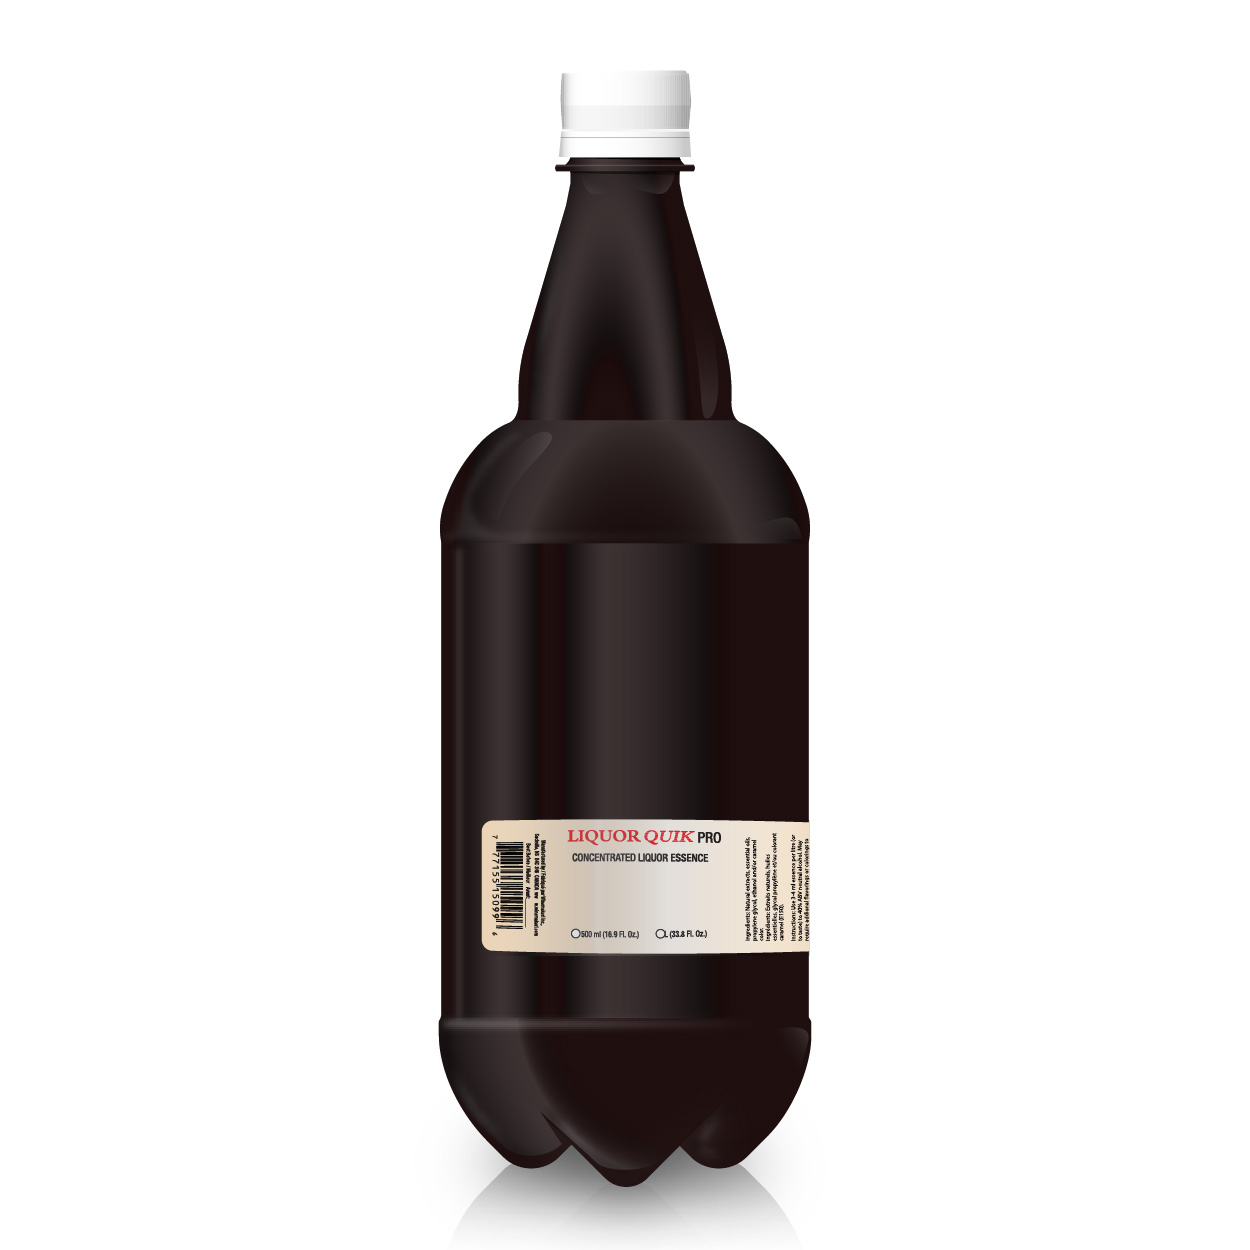 Product image for 10X Coffee Rum Esssence - 1 L